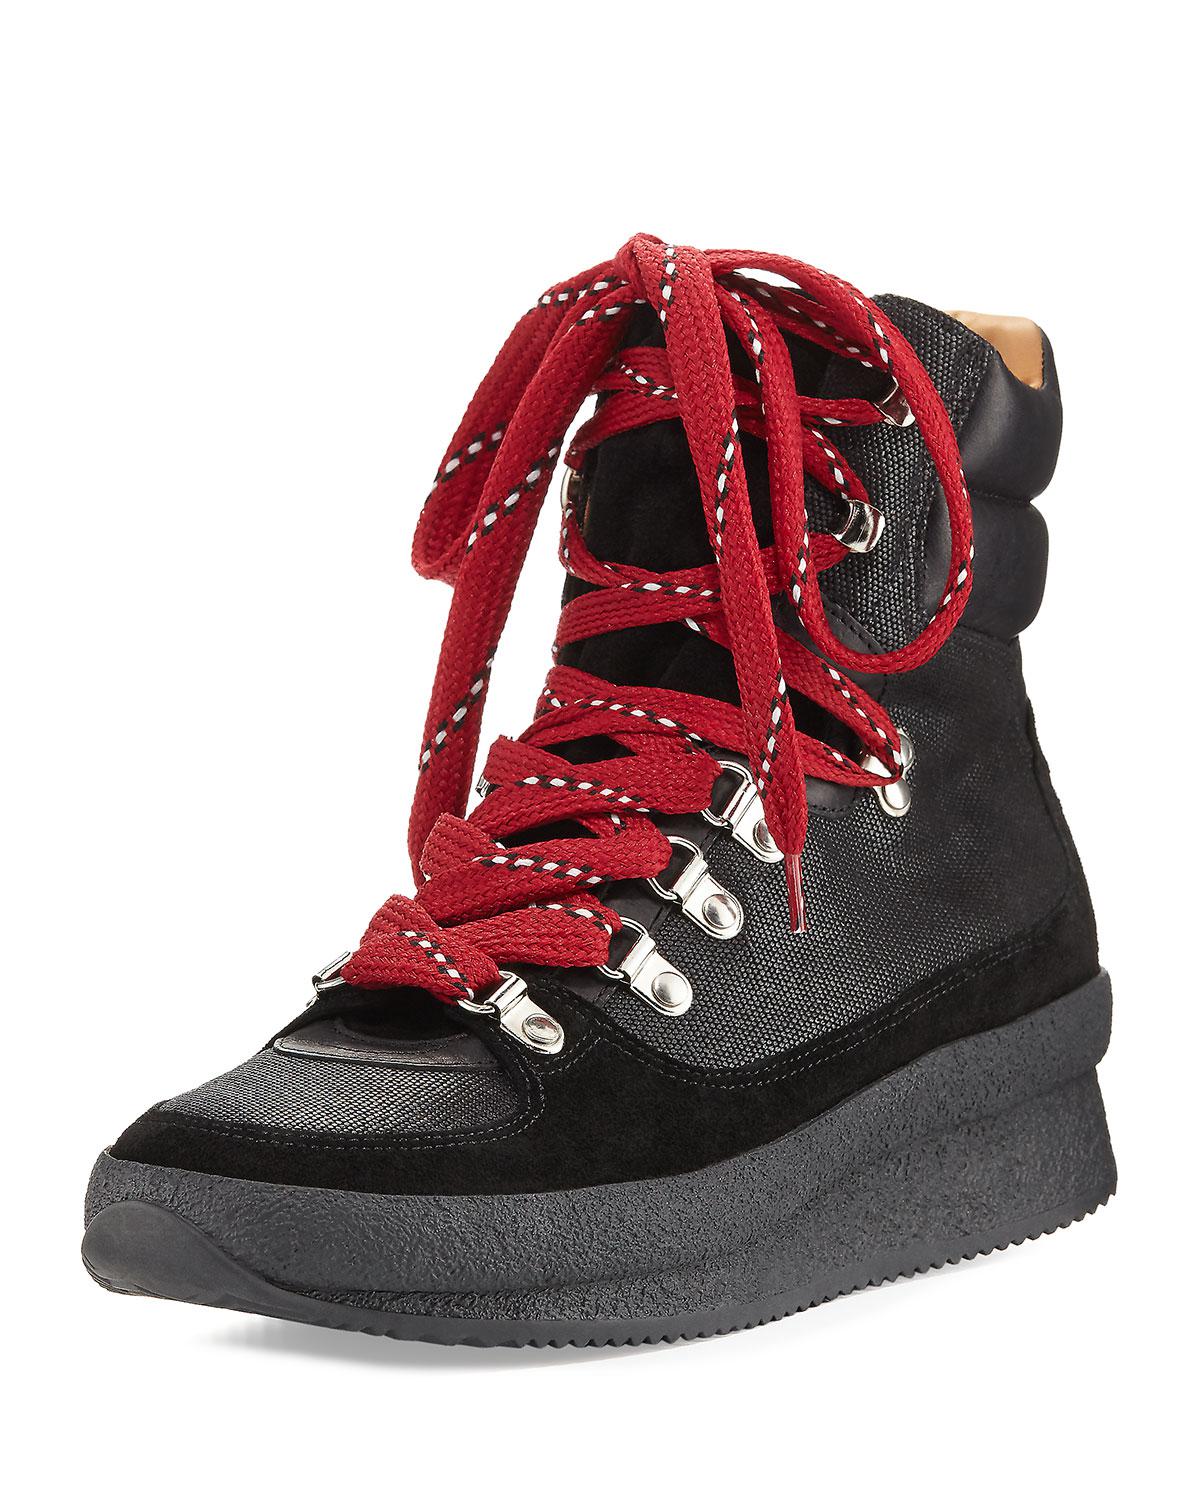 Isabel Marant Brendty Lace-up Leather Hiker Sneaker in Black - Lyst